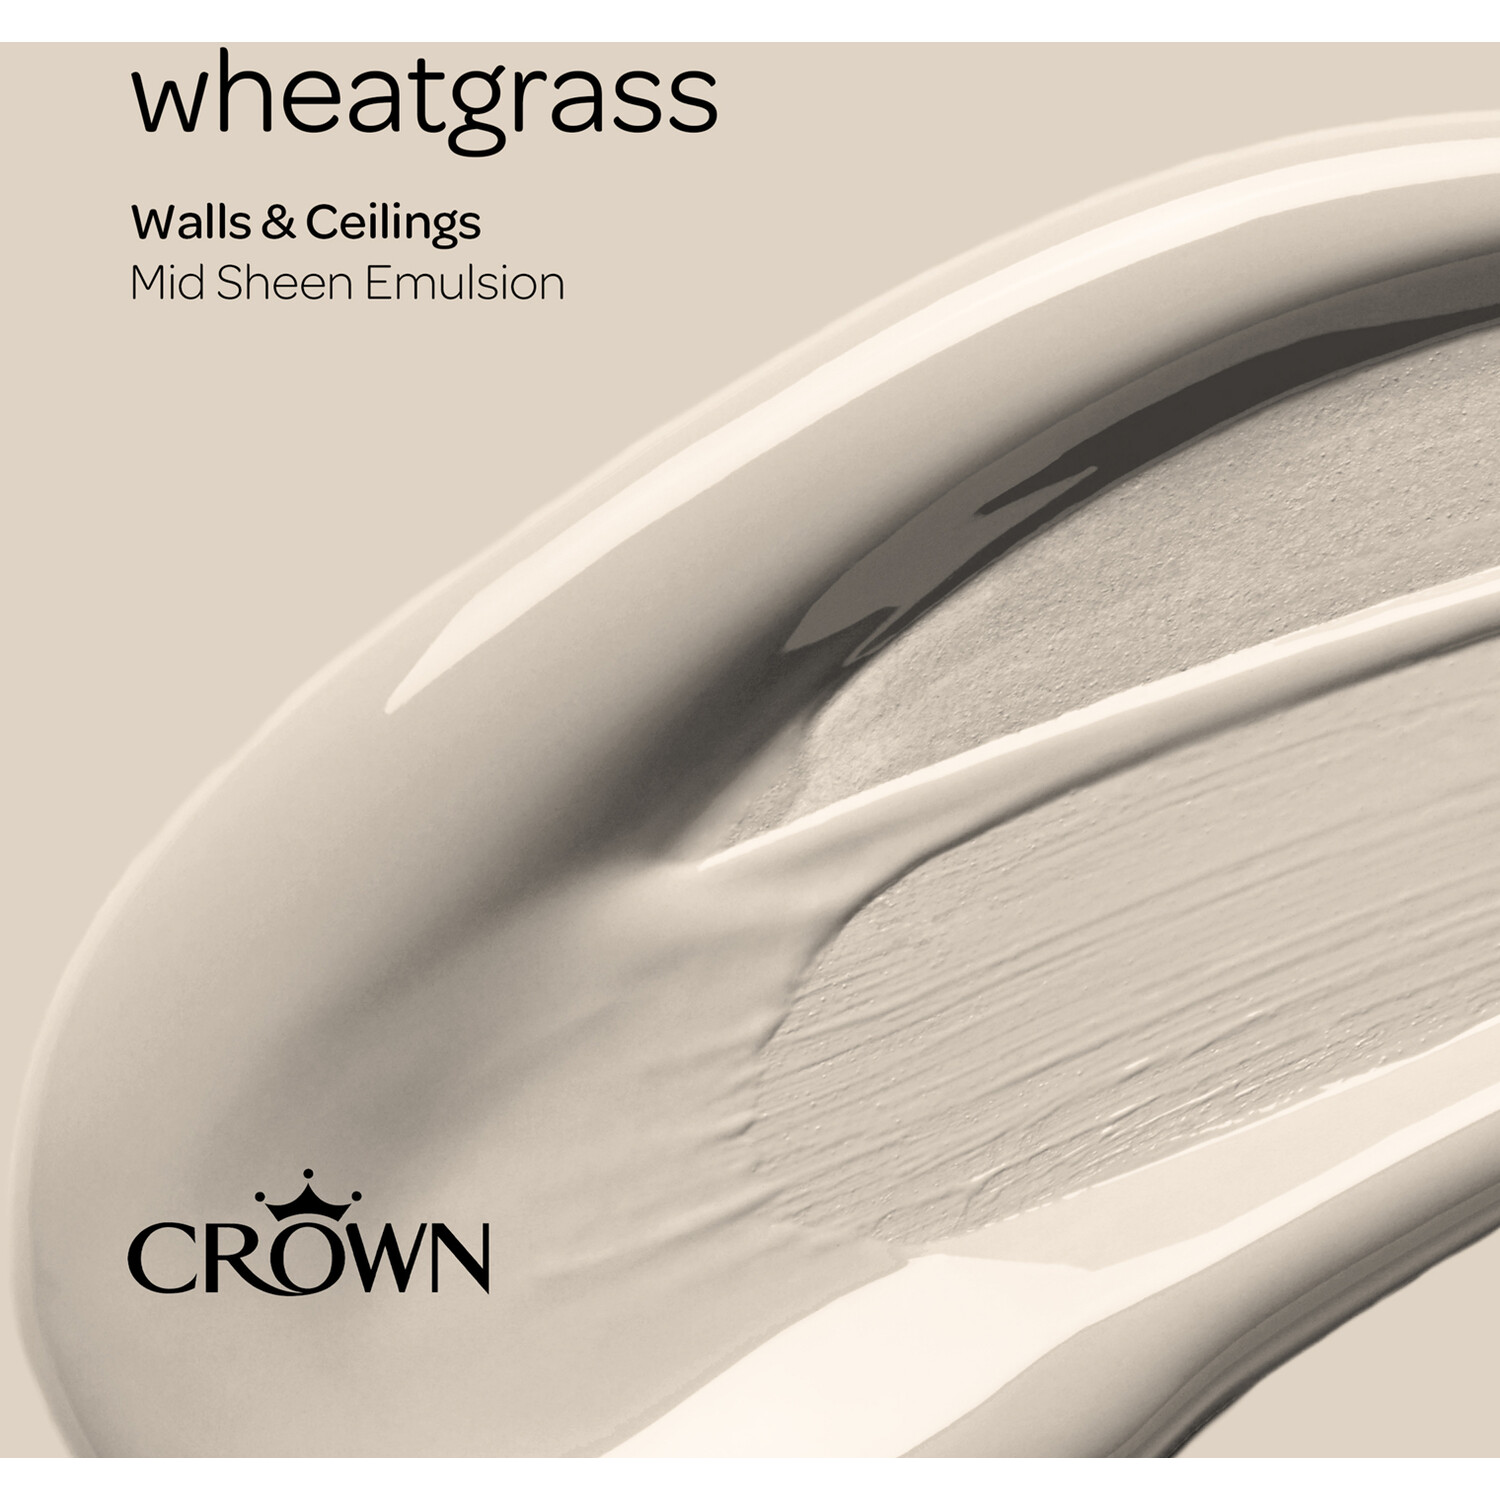 Crown Walls & Ceilings Wheatgrass Mid Sheen Emulsion Paint 2.5L Image 4